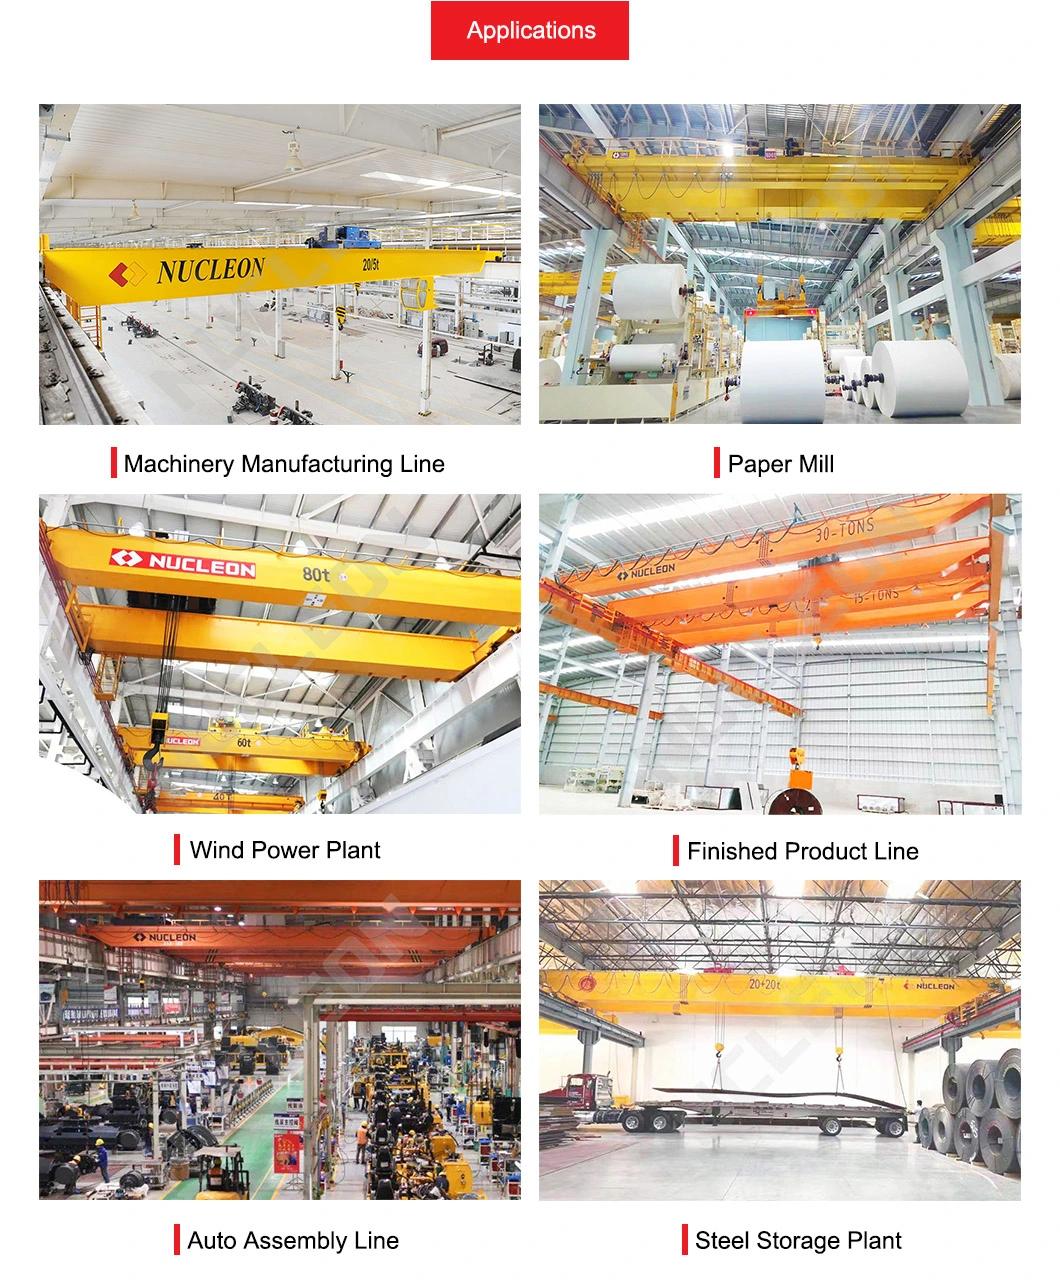 CE Certified Nucleon Nlh Double Girder Industrial Eot Crane with Trolley Hoist